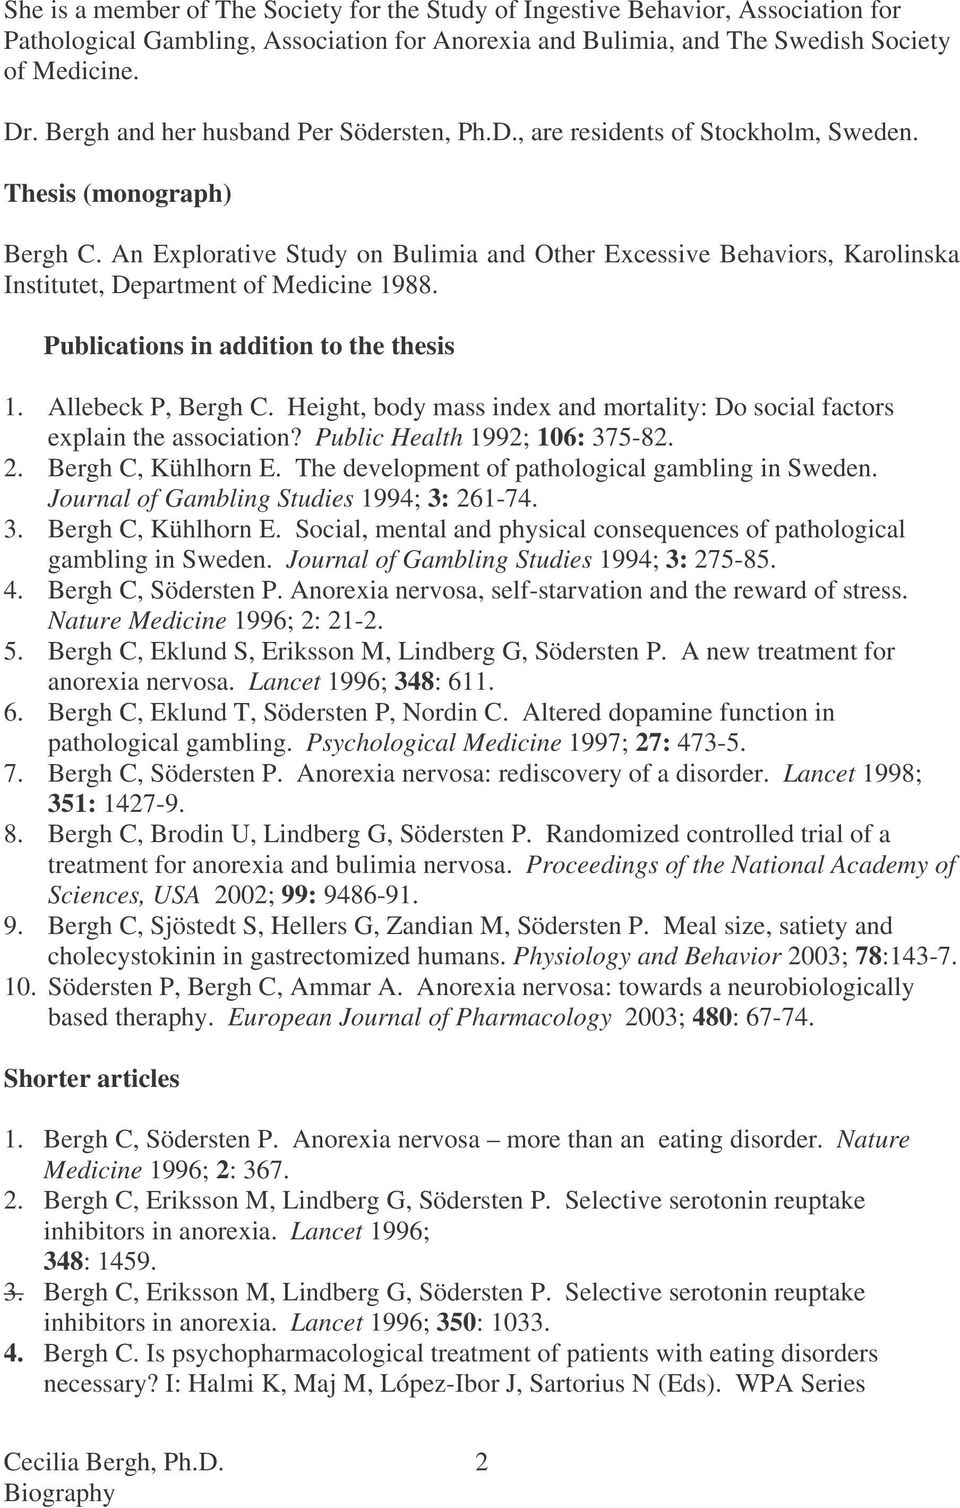 An Explorative Study on Bulimia and Other Excessive Behaviors, Karolinska Institutet, Department of Medicine 1988. Publications in addition to the thesis 1. Allebeck P, Bergh C.